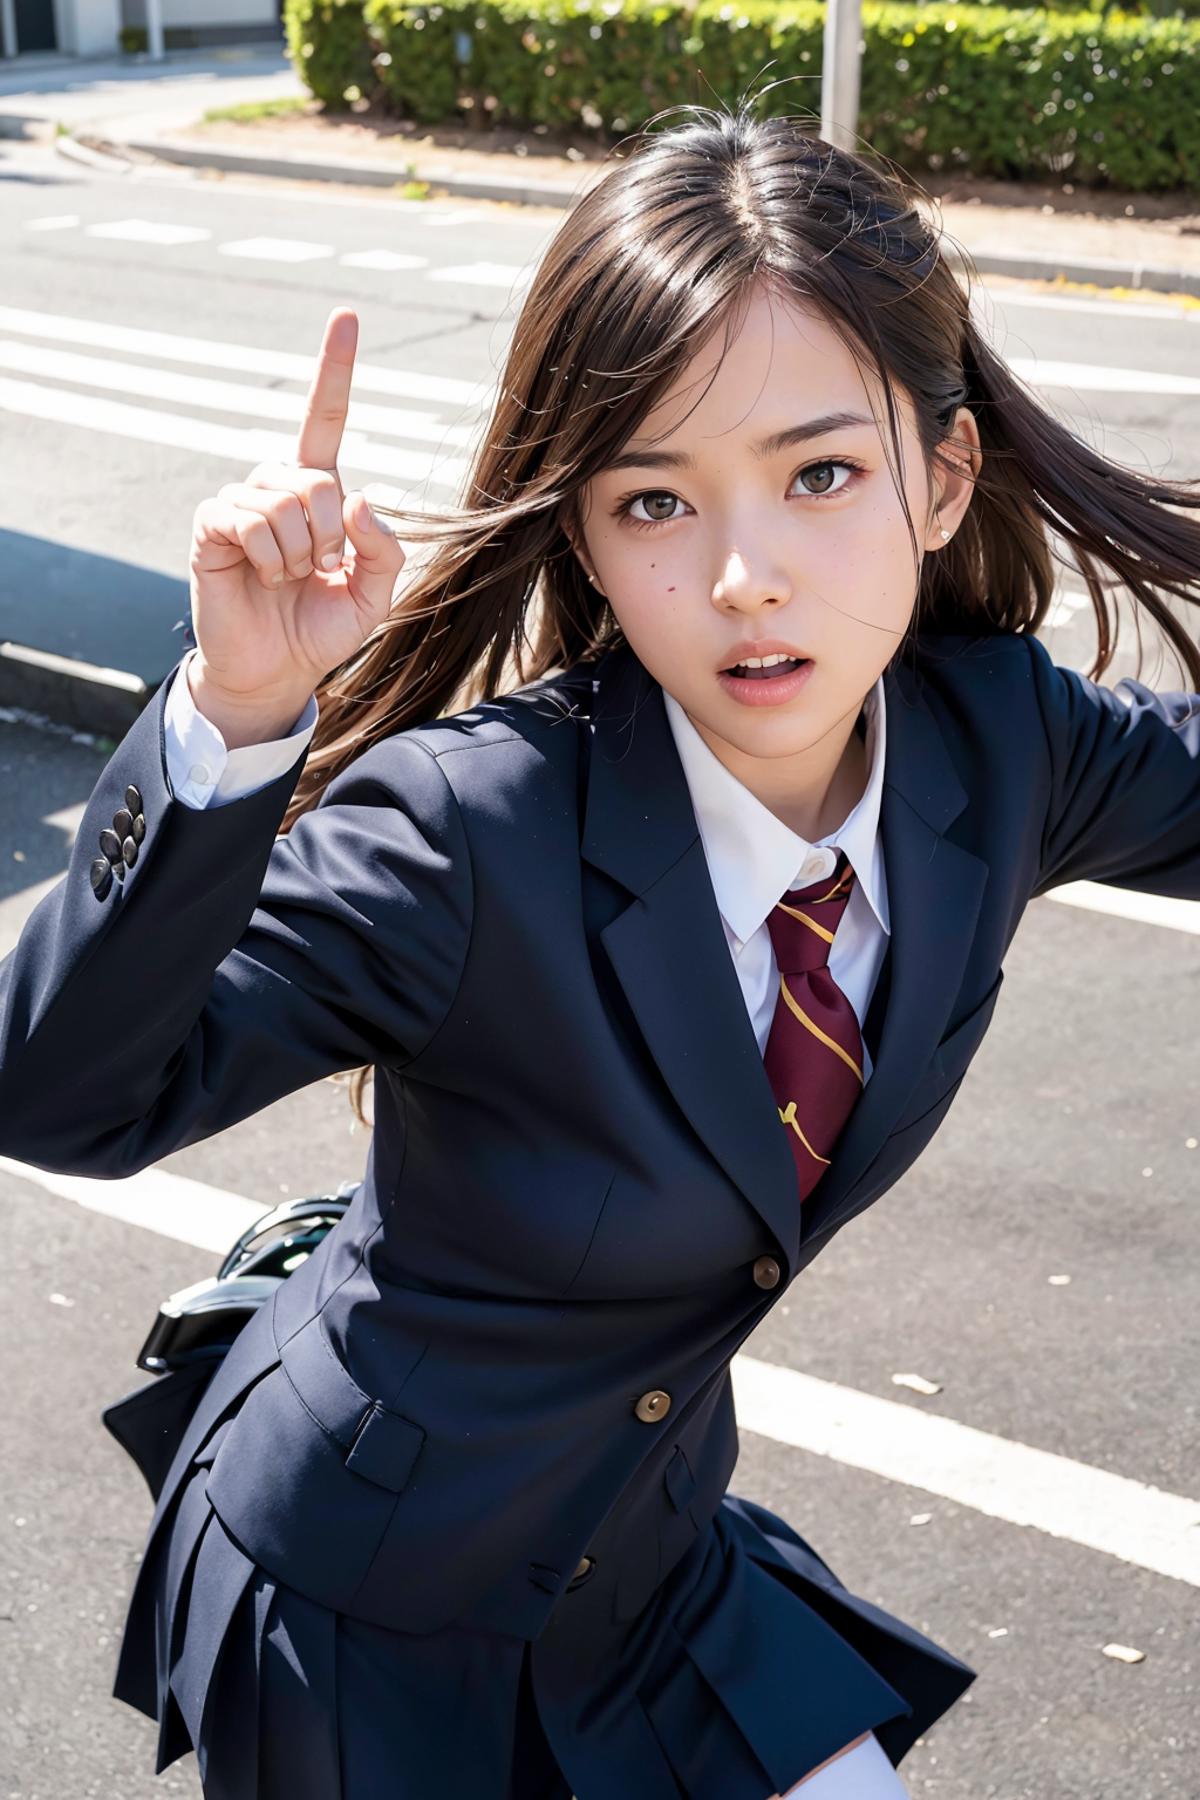 A young woman wearing a suit and tie pointing her finger.